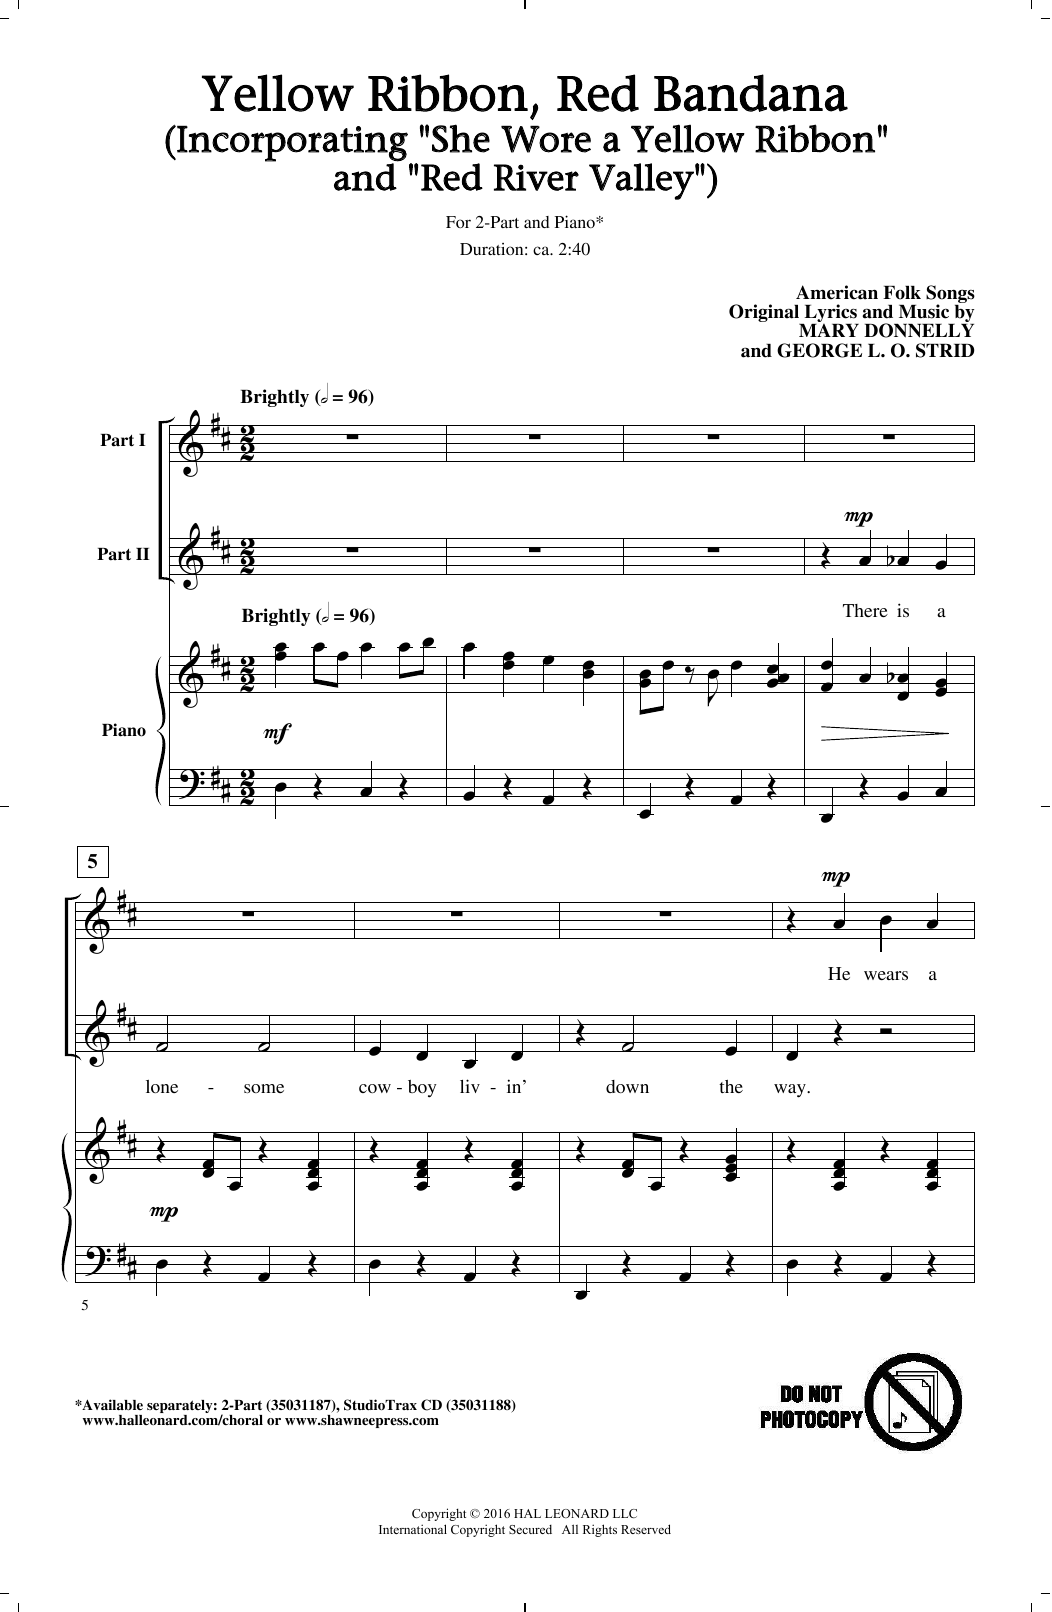 Download Mary Donnelly and George L.O. Strid Yellow Ribbon, Red Bandana (Incorporati Sheet Music